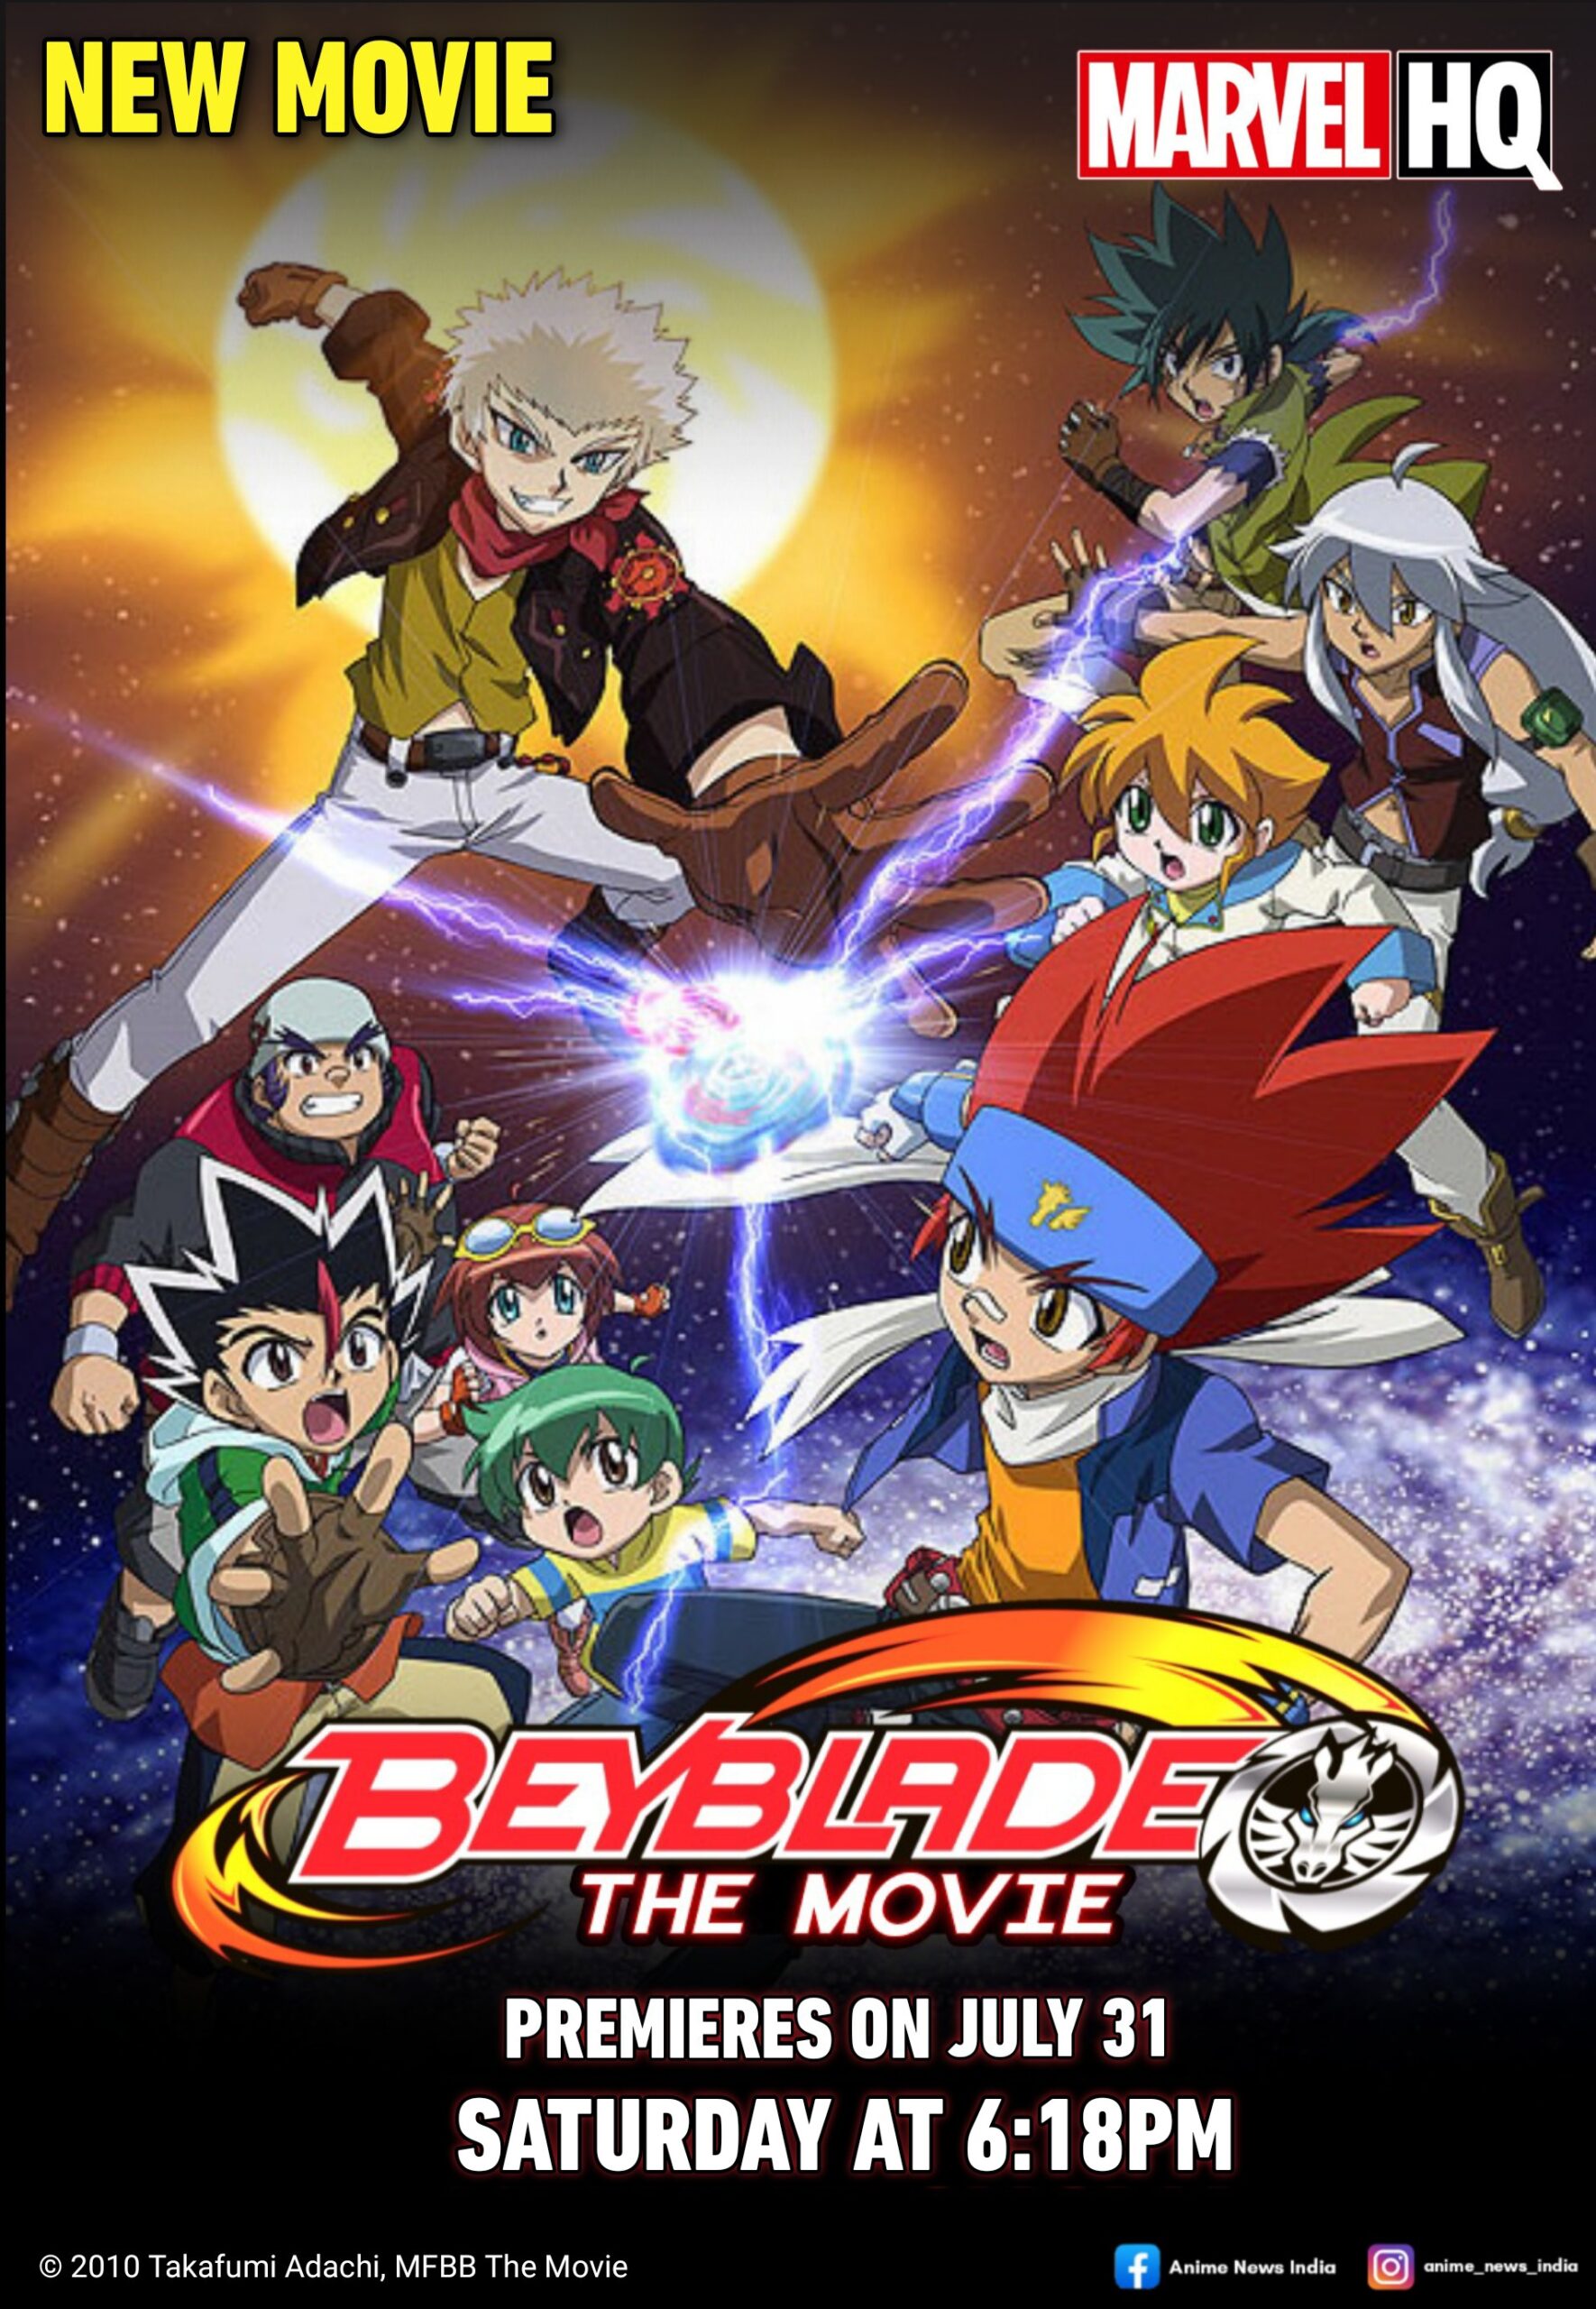 Marvel HQ India To Premiere Metal Fight Beyblade The Movie on July 31.